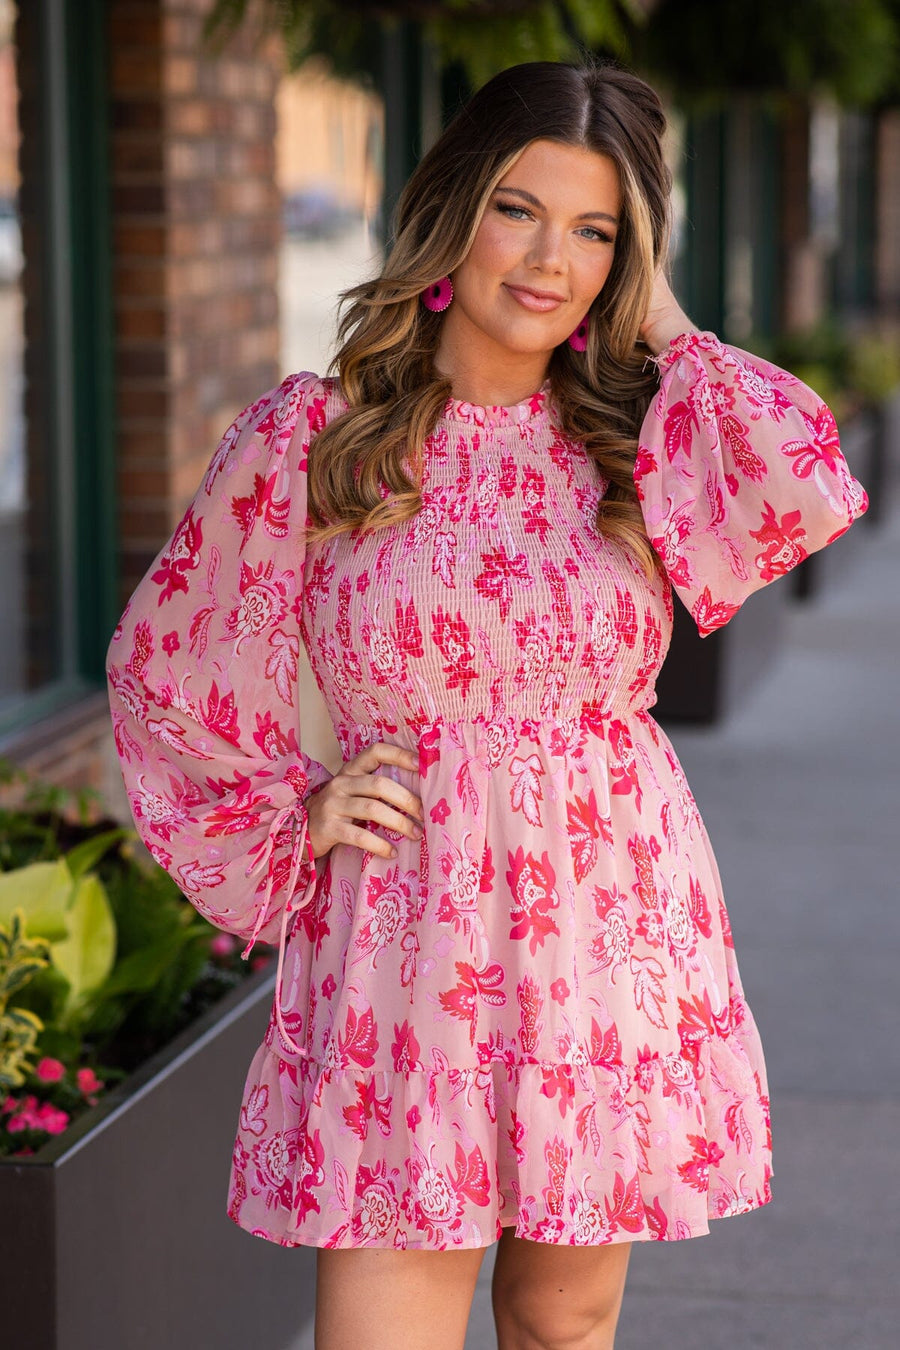 Hot Pink and Blush Floral Long Sleeve Dress - Filly Flair